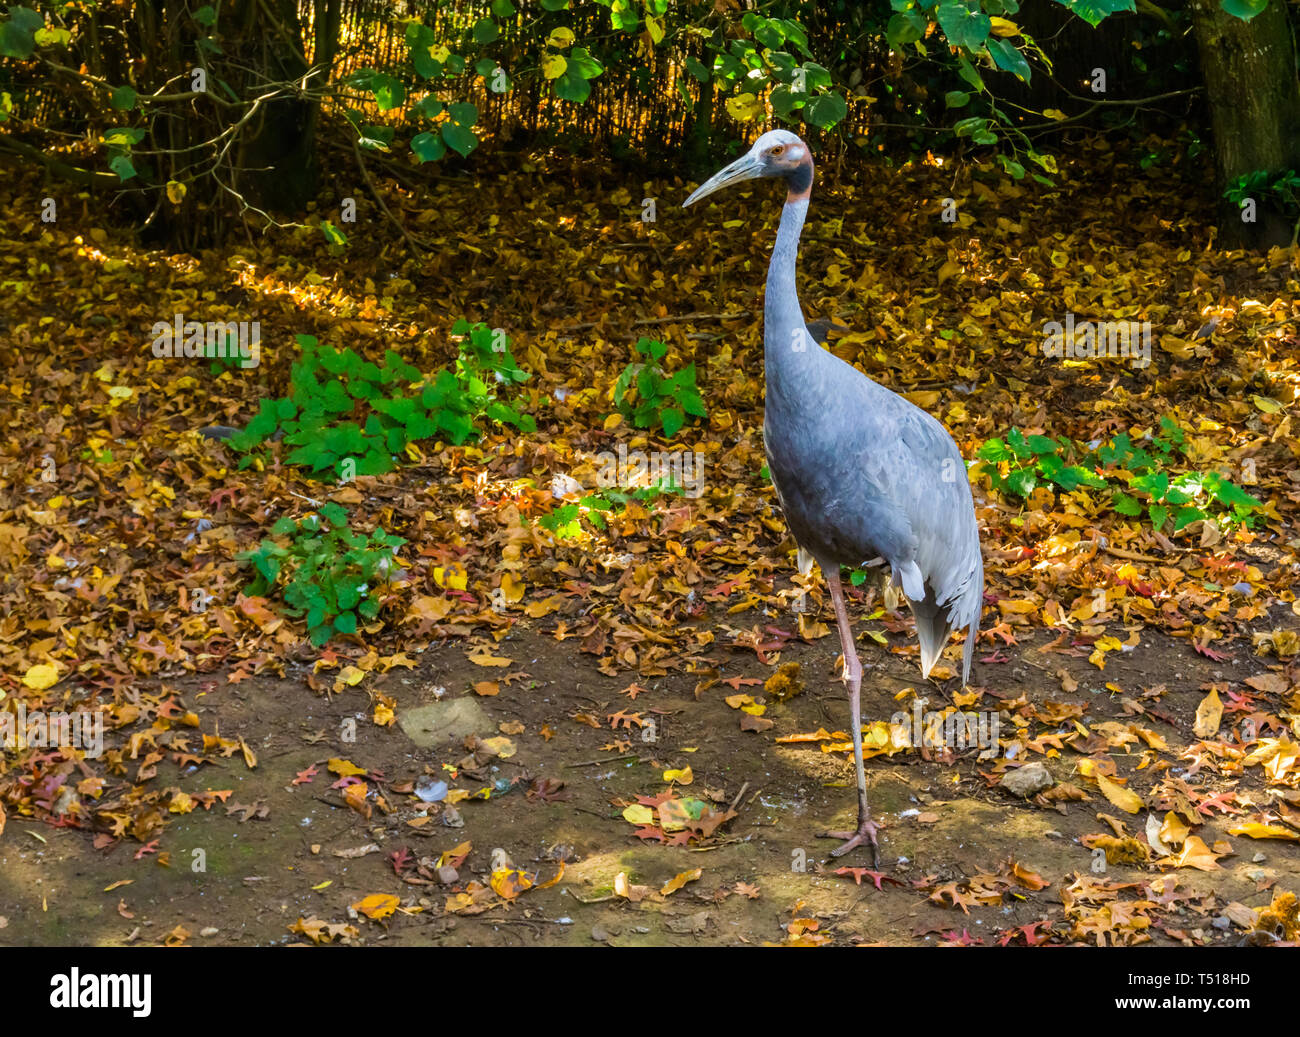 portrait of a sarus crane standing on one leg, tropical bird from Asia, Threatened animal specie Stock Photo